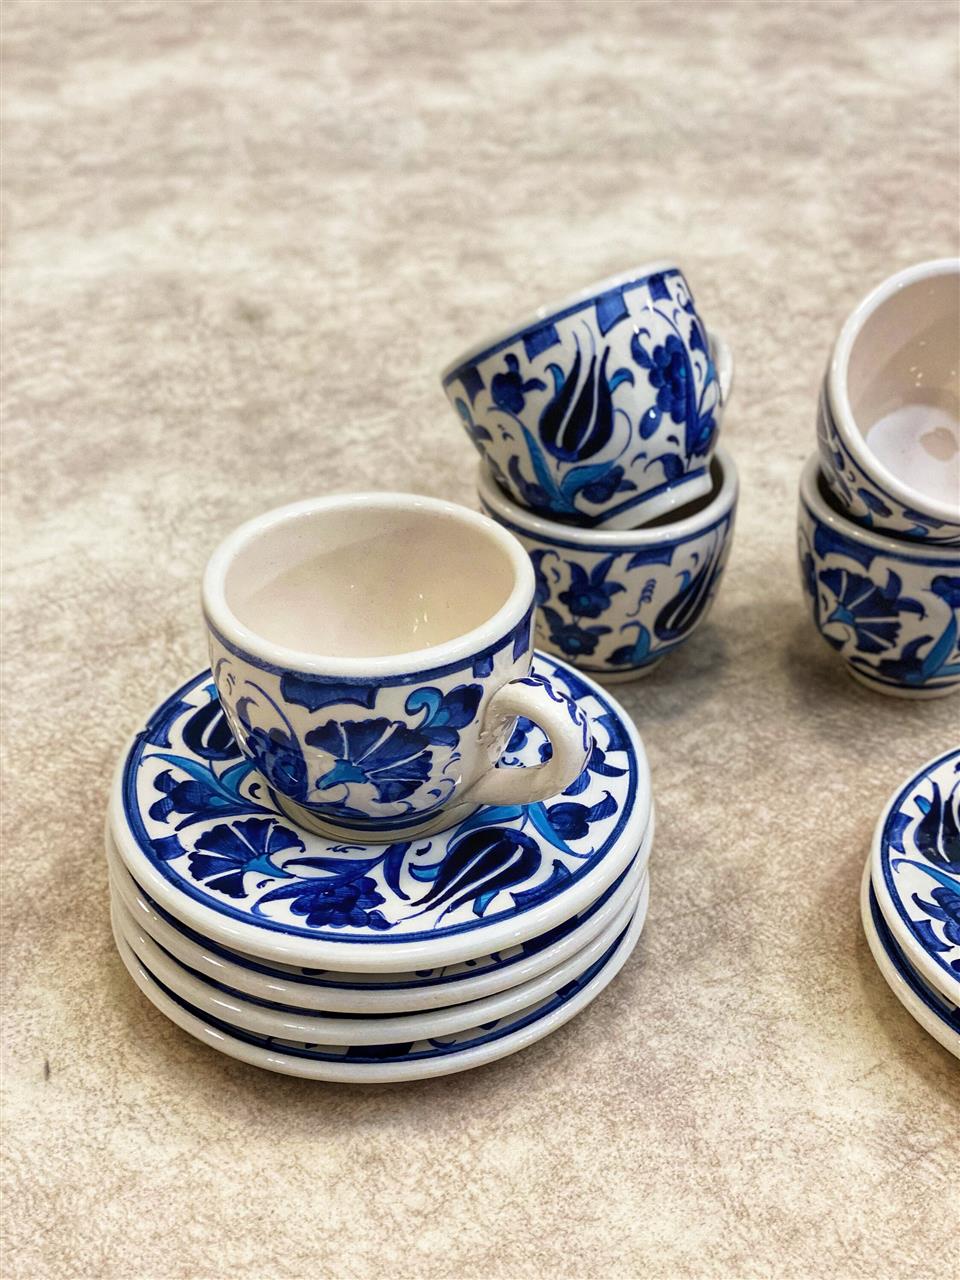 6x Hand Painted Traditional Ceramic Espresso Cups And Saucers Set, Turkish  Coffee Cup Set, Macchiato Cup, Pottery Espresso Cup Set